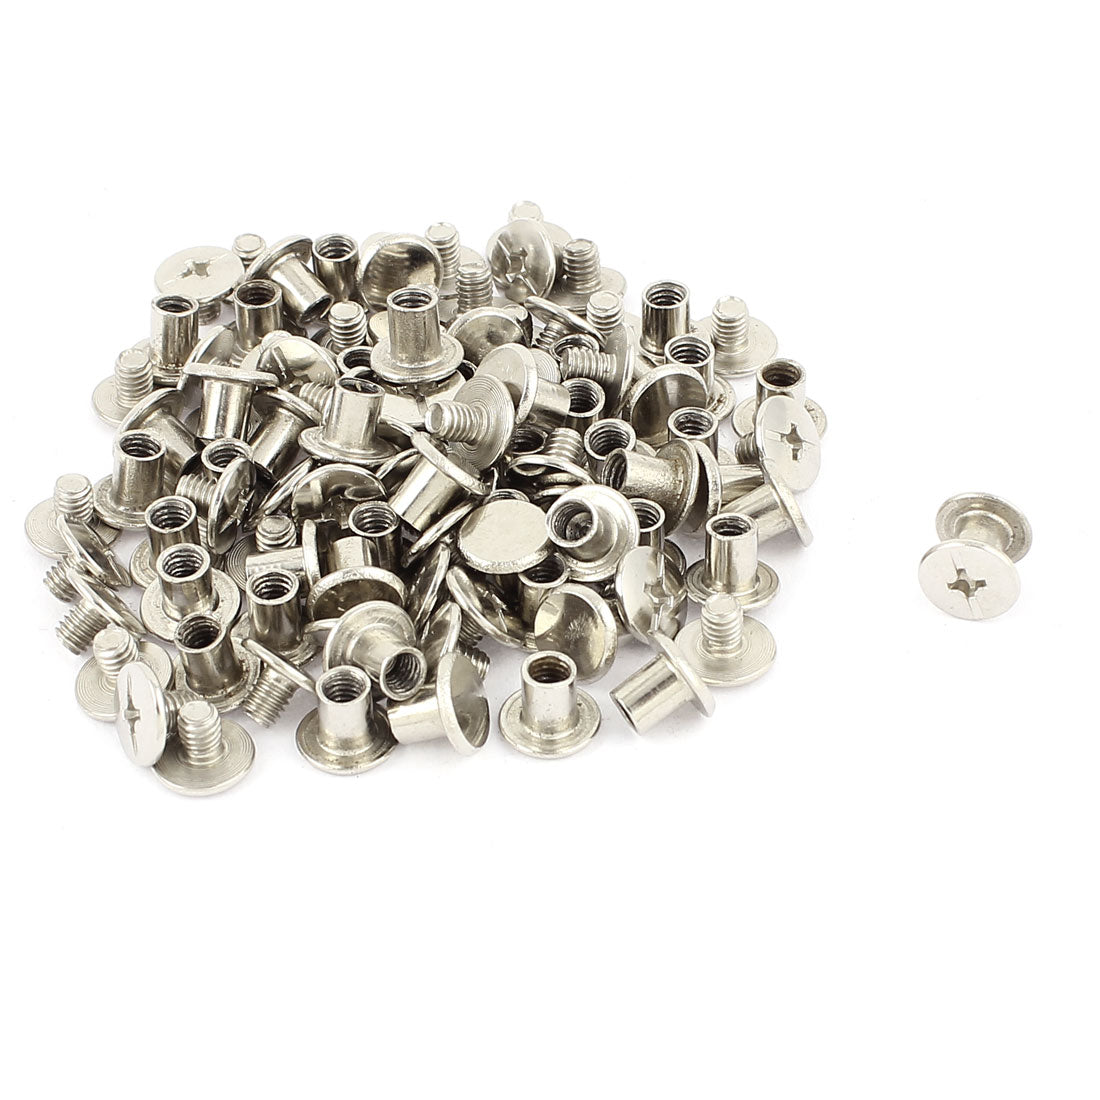 uxcell Uxcell 50Pcs M5x6mm Nickel Plated Binding Screw Post for Scrapbook Photo Albums